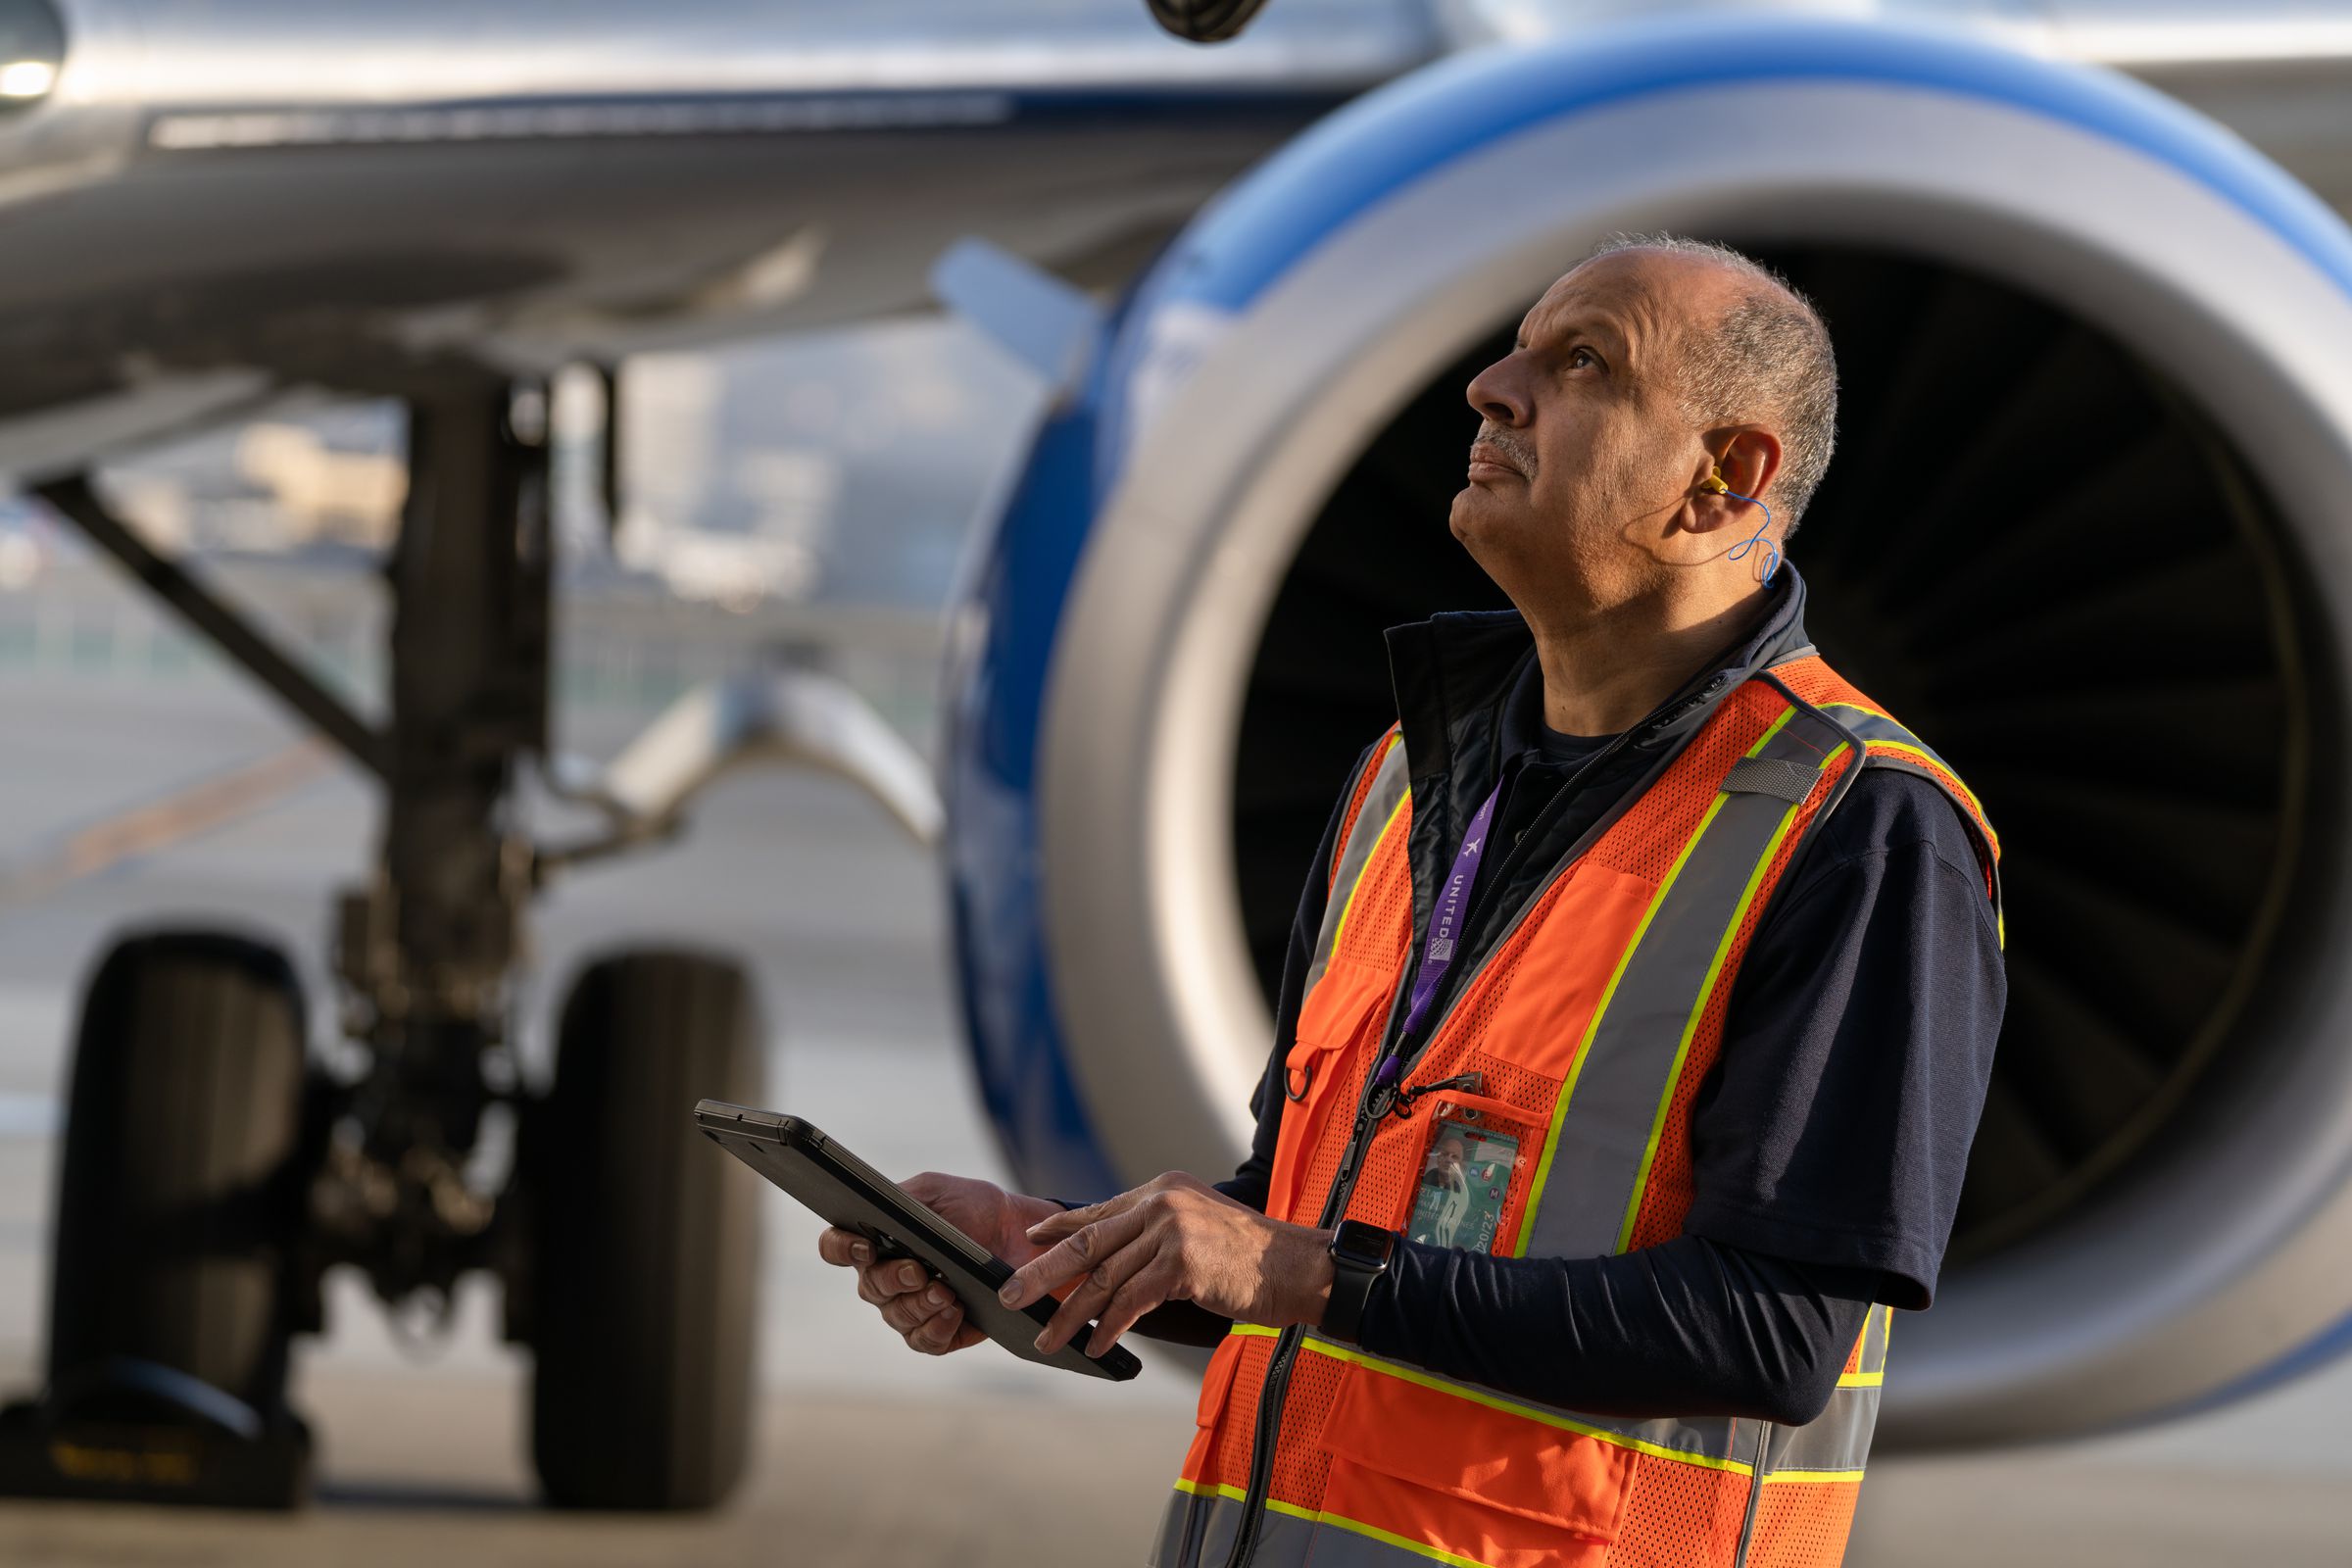 United lead line technician Mansur Zia observes the exterior of the plane and uses the iPad to create service tickets and perform a digital maintenance release sign-off.